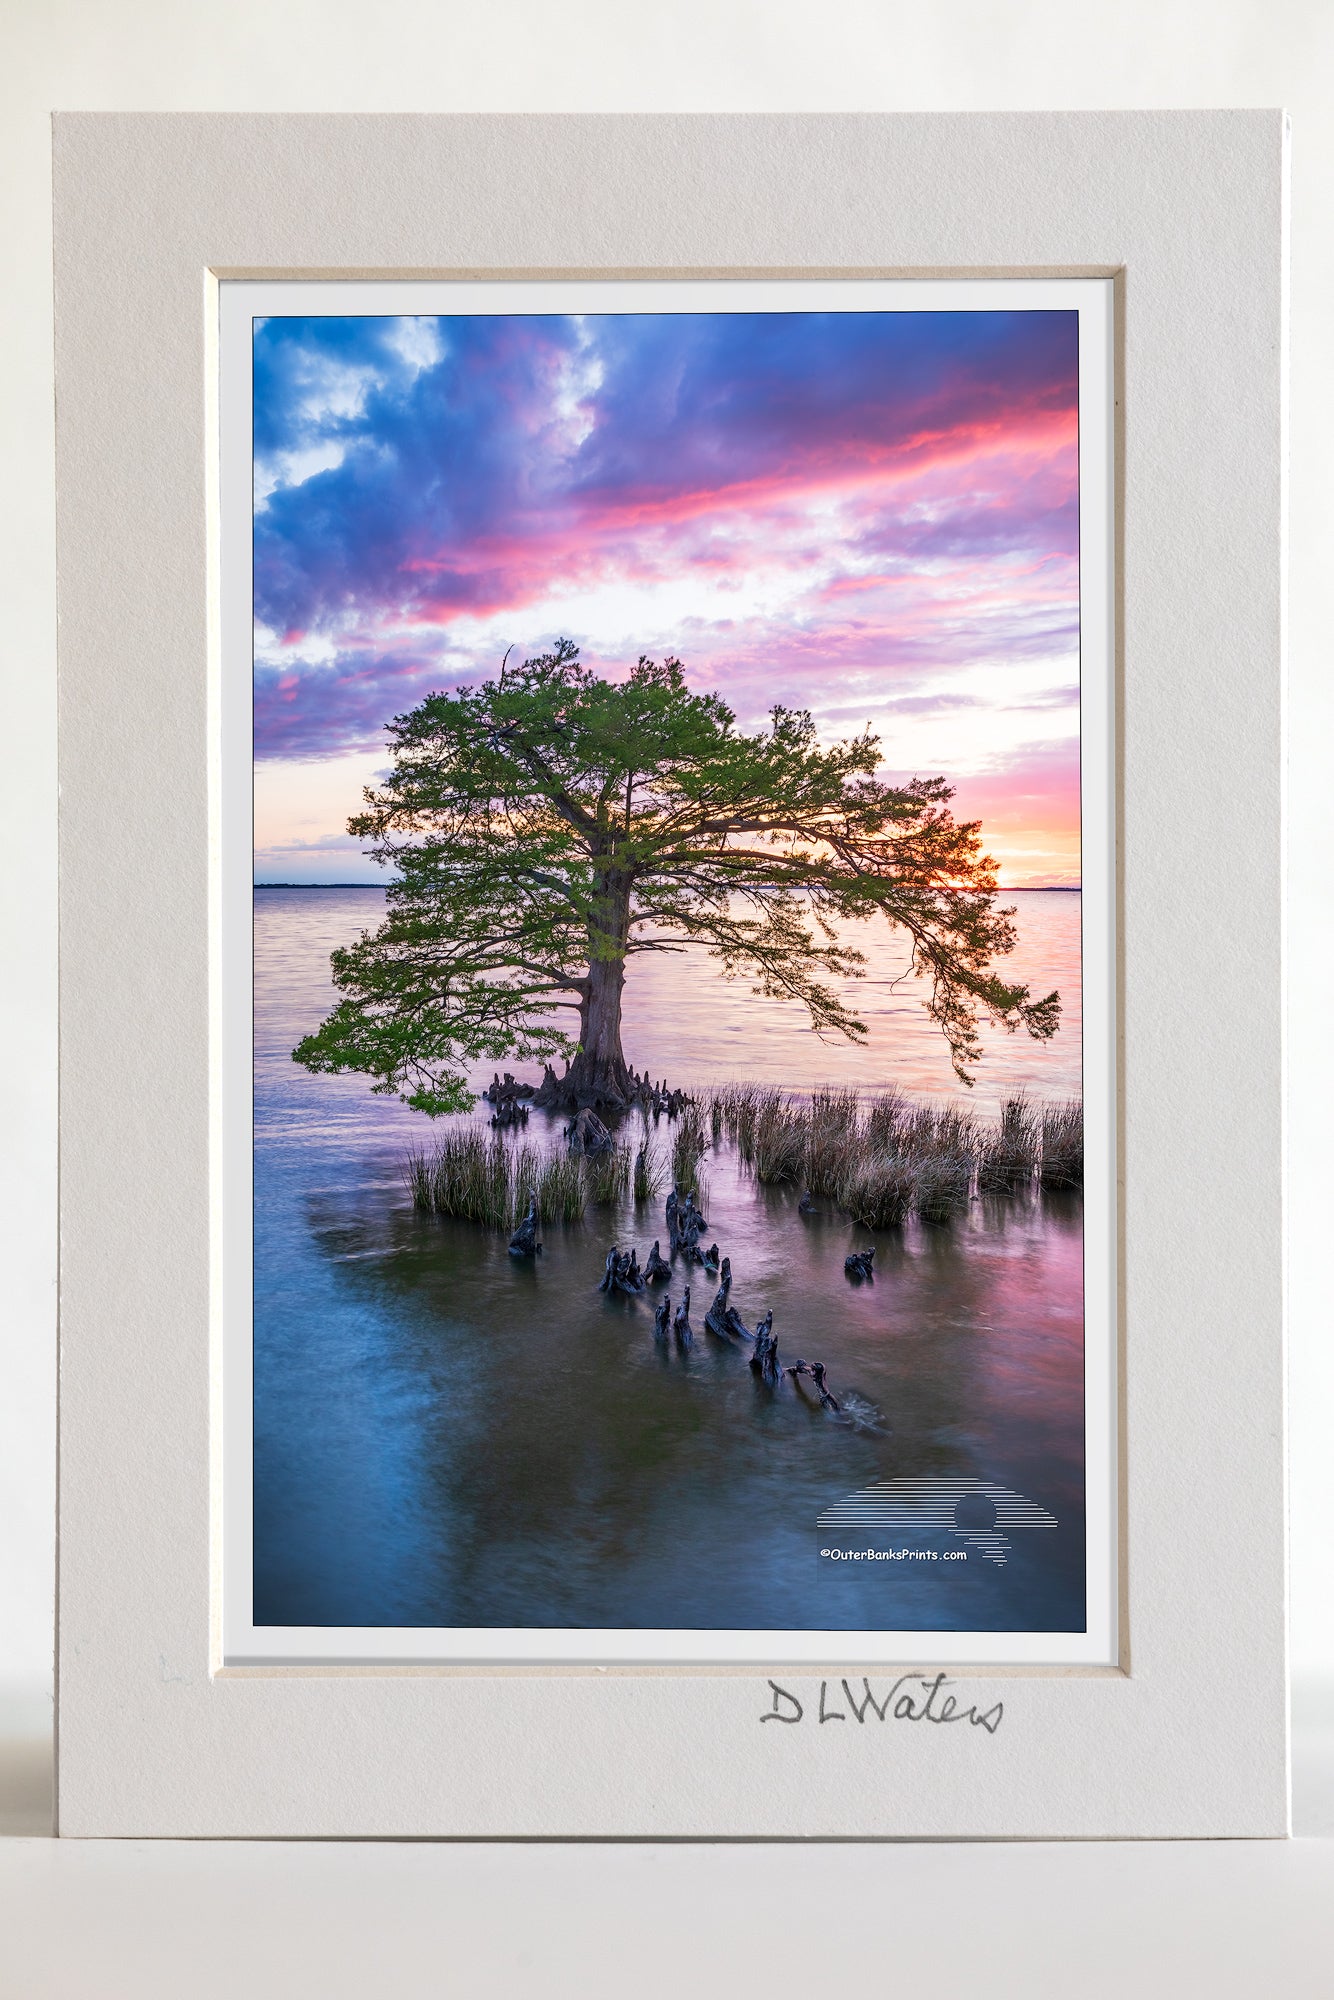 4 x 6 luster print in a 5 x 7 ivory mat of A stunning sunset over the Currituck Sound of a Cypress tree in Duck NC on the Outer Banks